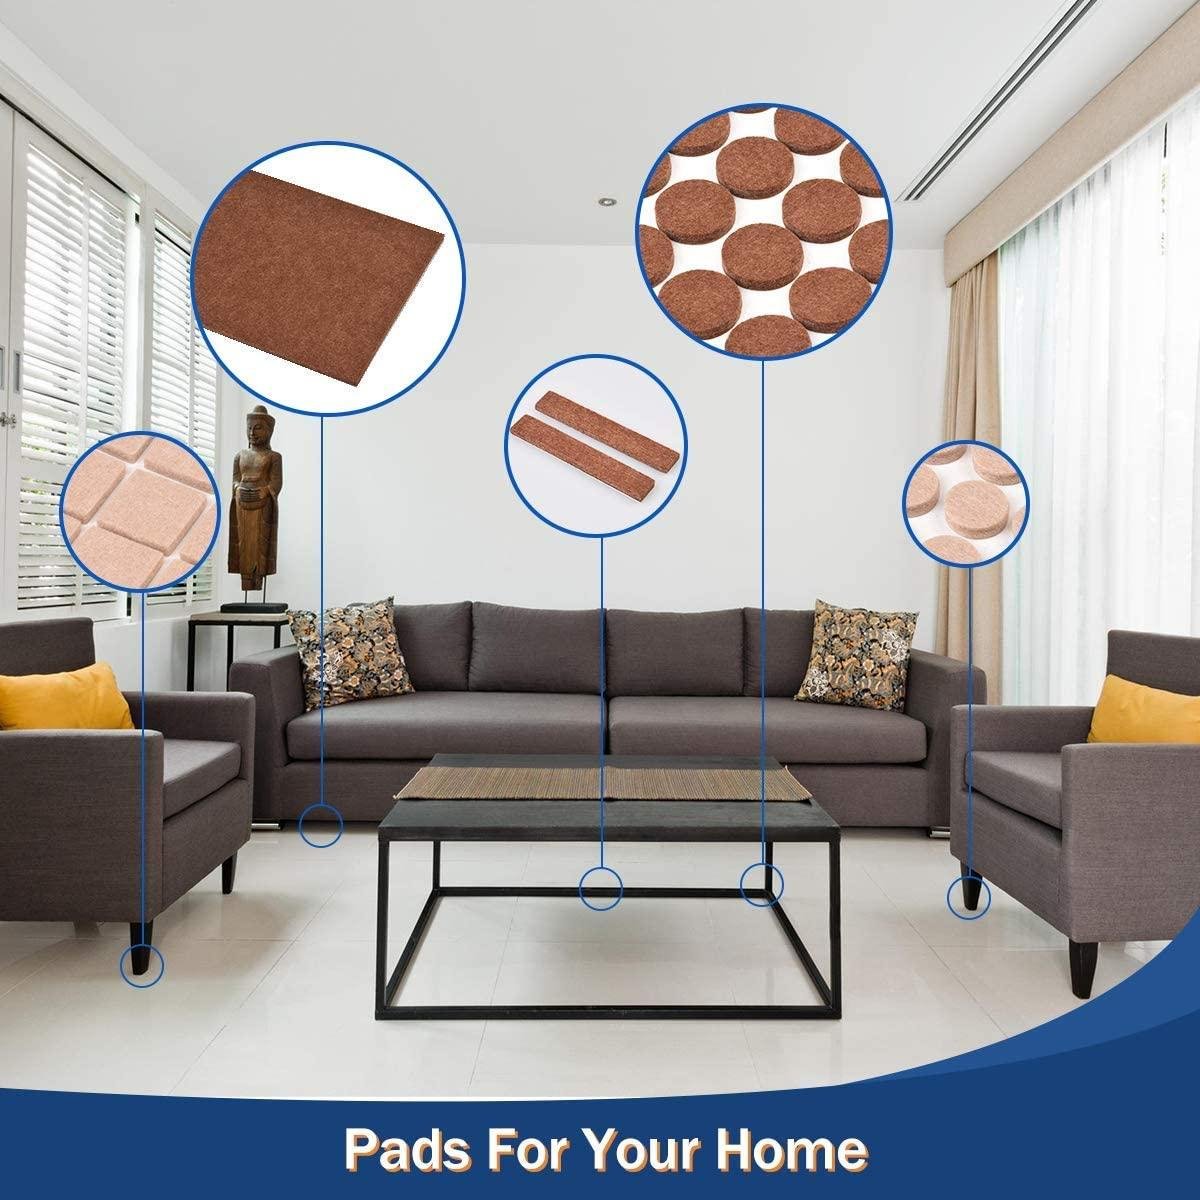 Customized Self Adhesive Felt Furniture Pads for floor protectionFactory 4